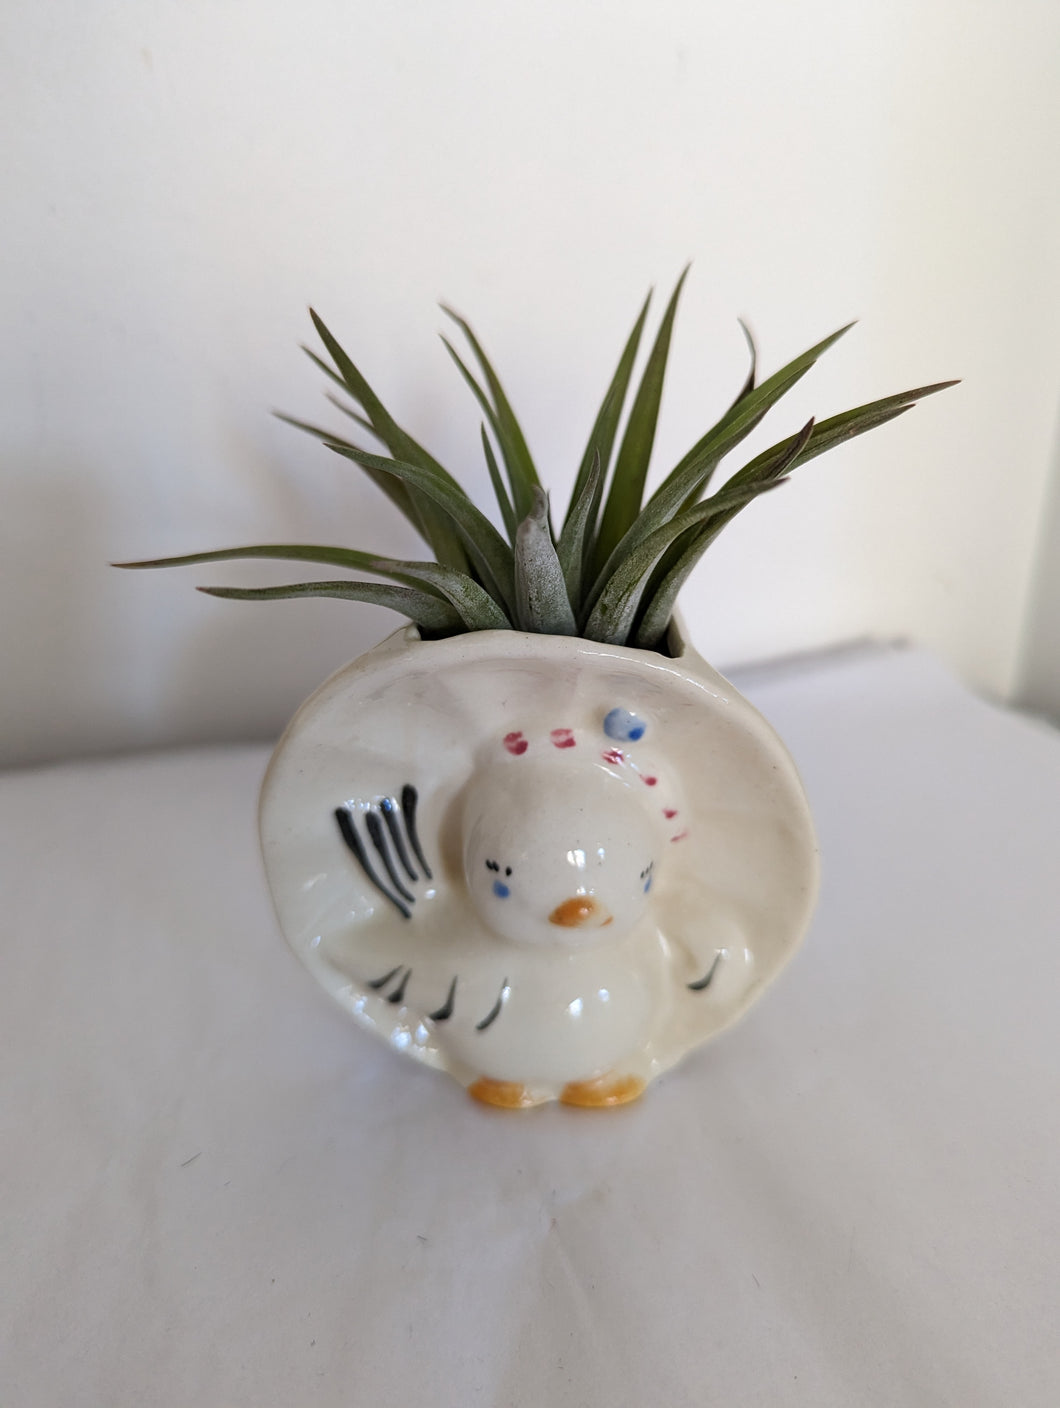 Vintage/Previously Adored Chick Planter